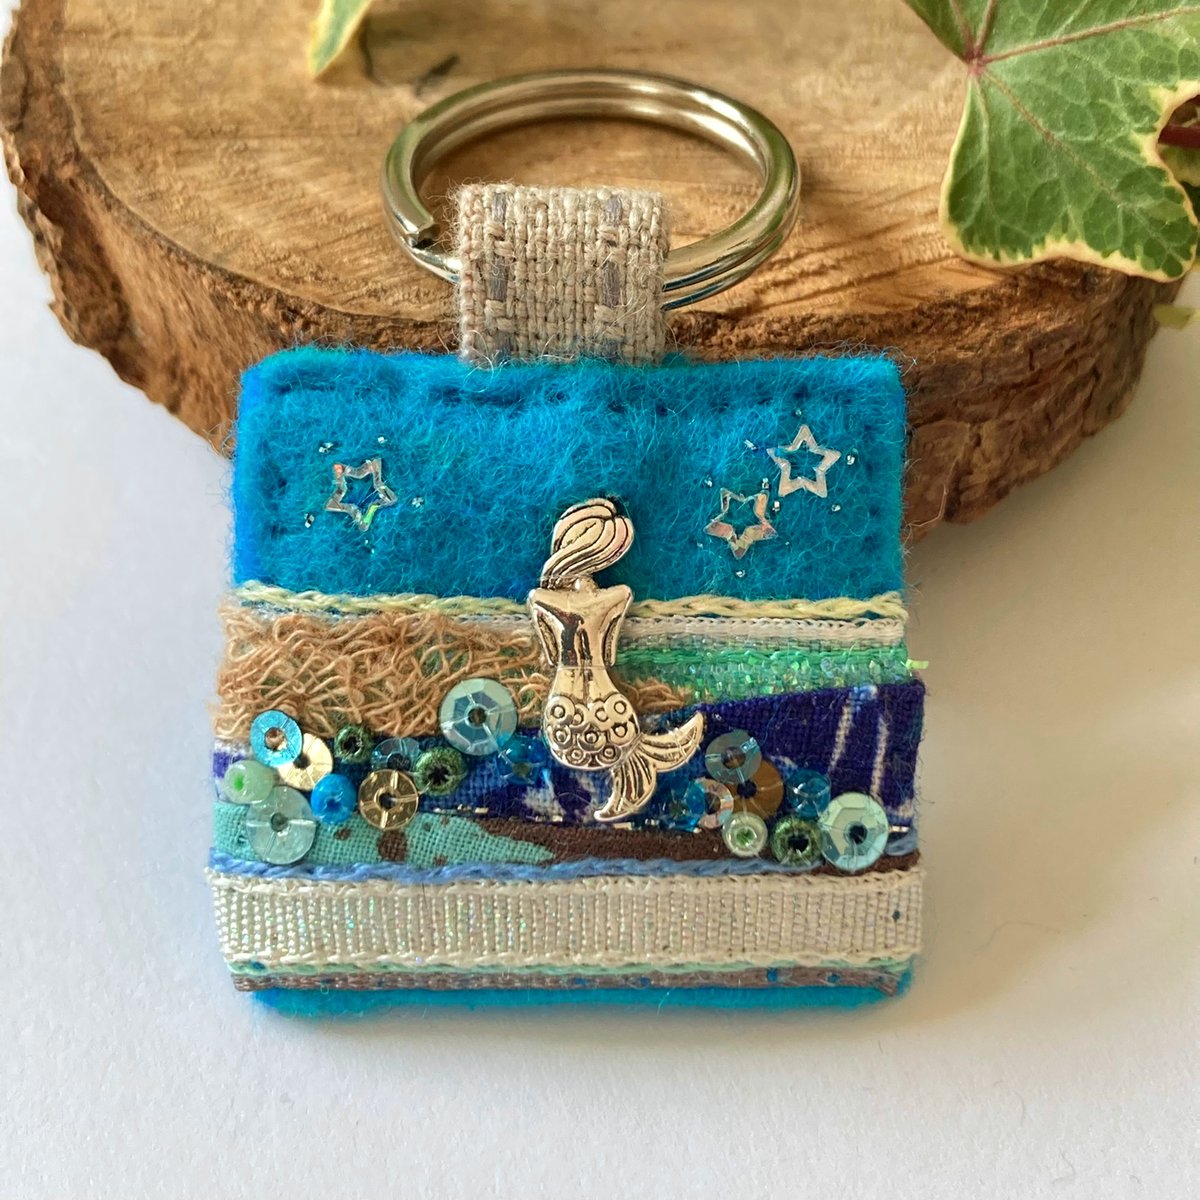 A thoughtful #mermaid for Wednesday evening - I wonder what she dreams about as she's looking out to sea 🤔🧜‍♀️. elliestreasures.square.site/product/mermai… Individually designed, hand sewn #accessories. #mhhsbd #handmadehour #ShopEarly